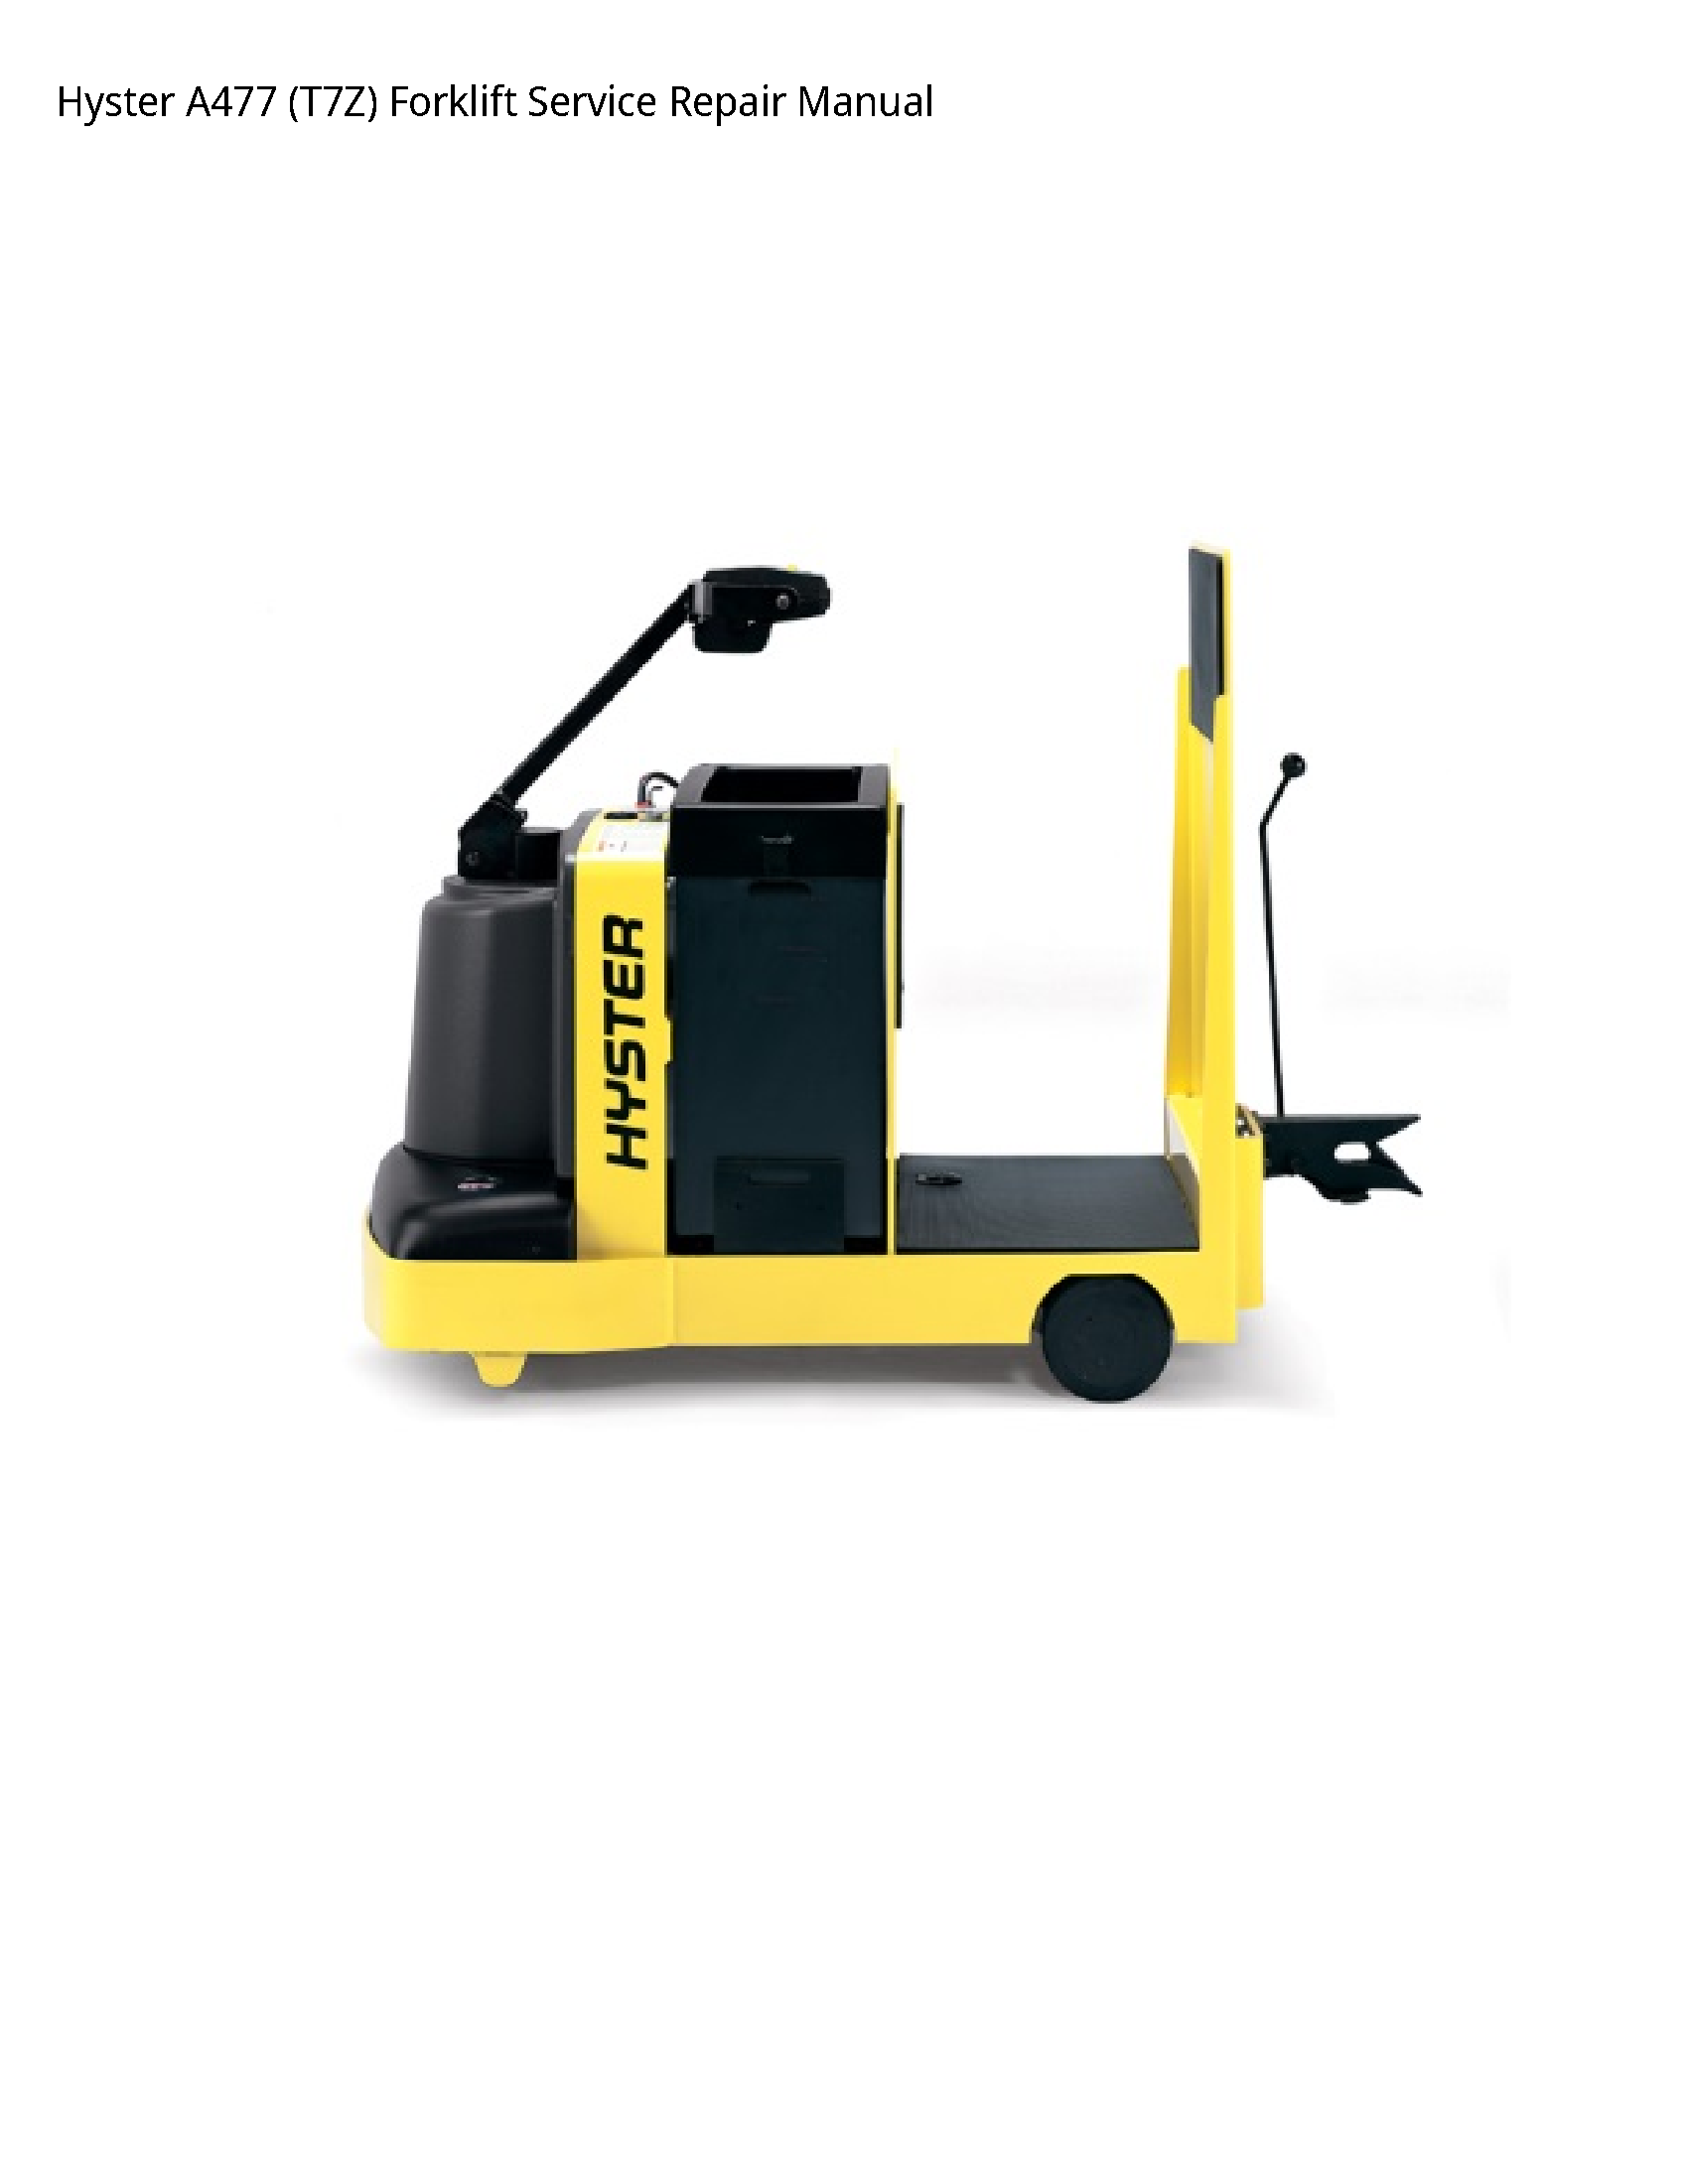 Hyster A477 Forklift manual